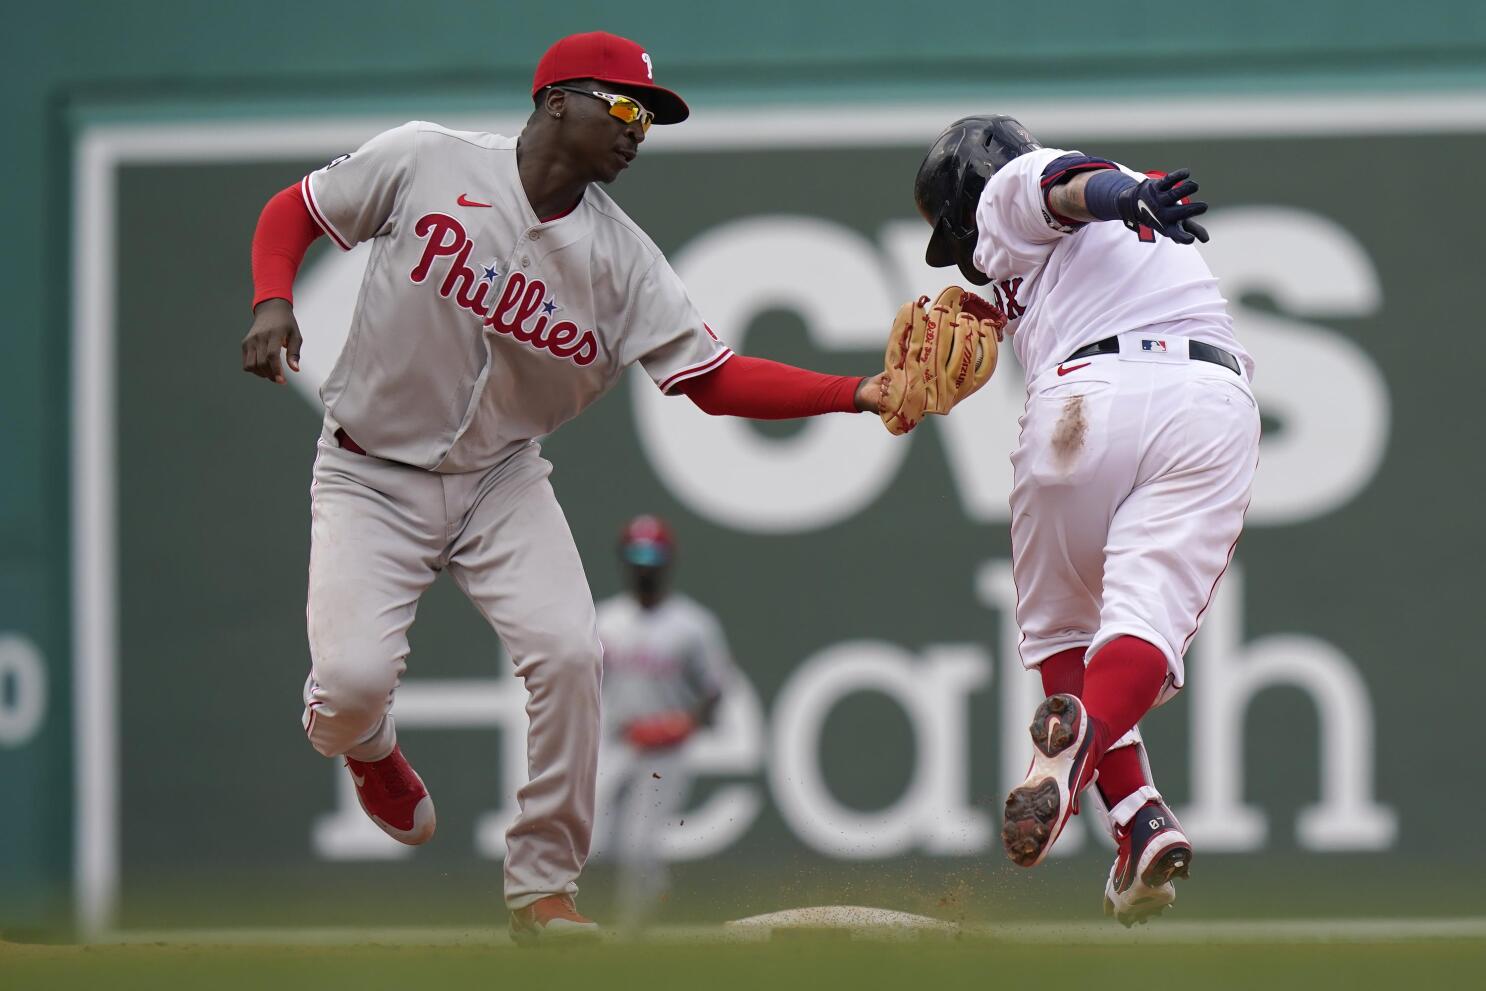 Torreyes homers, Philly bullpen shines in 5-4 win over BoSox